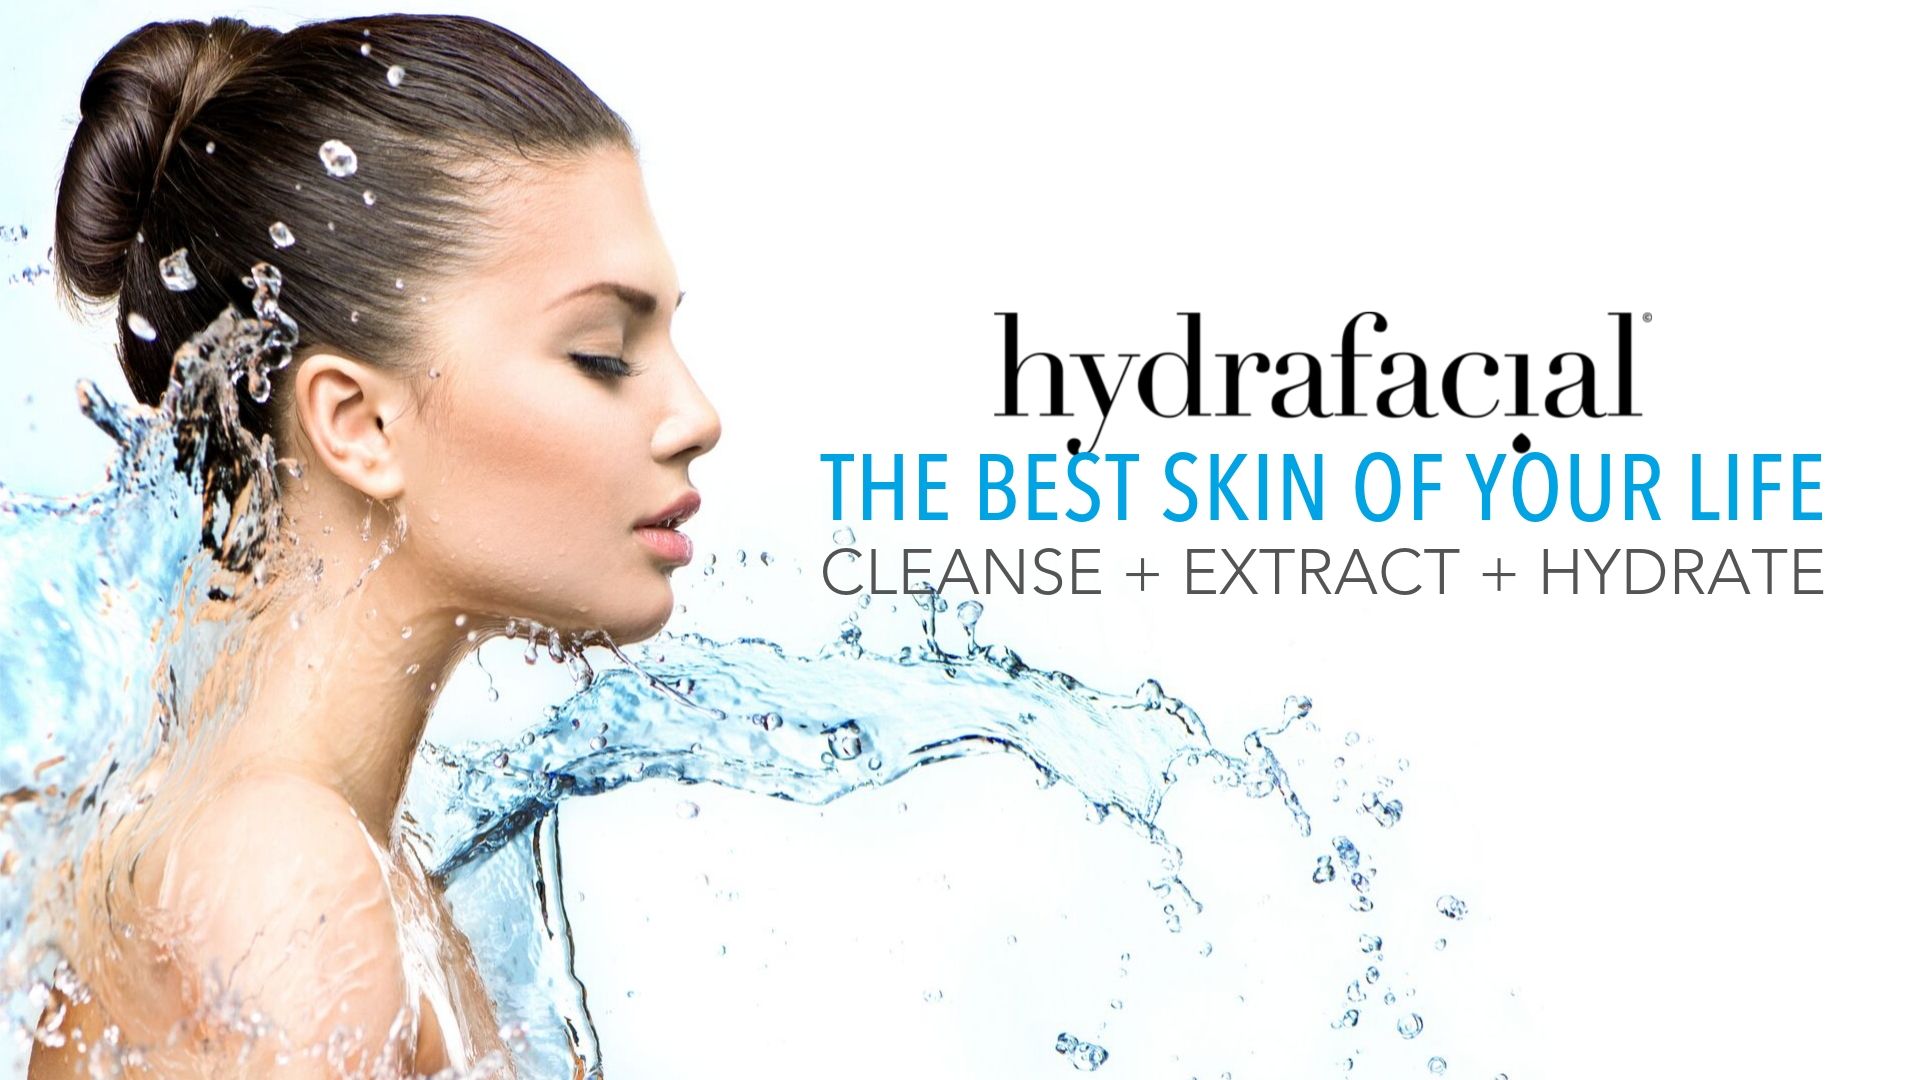 Woman with clear and hydrated skin from hydrafacial at Shore Medical Aesthethics.